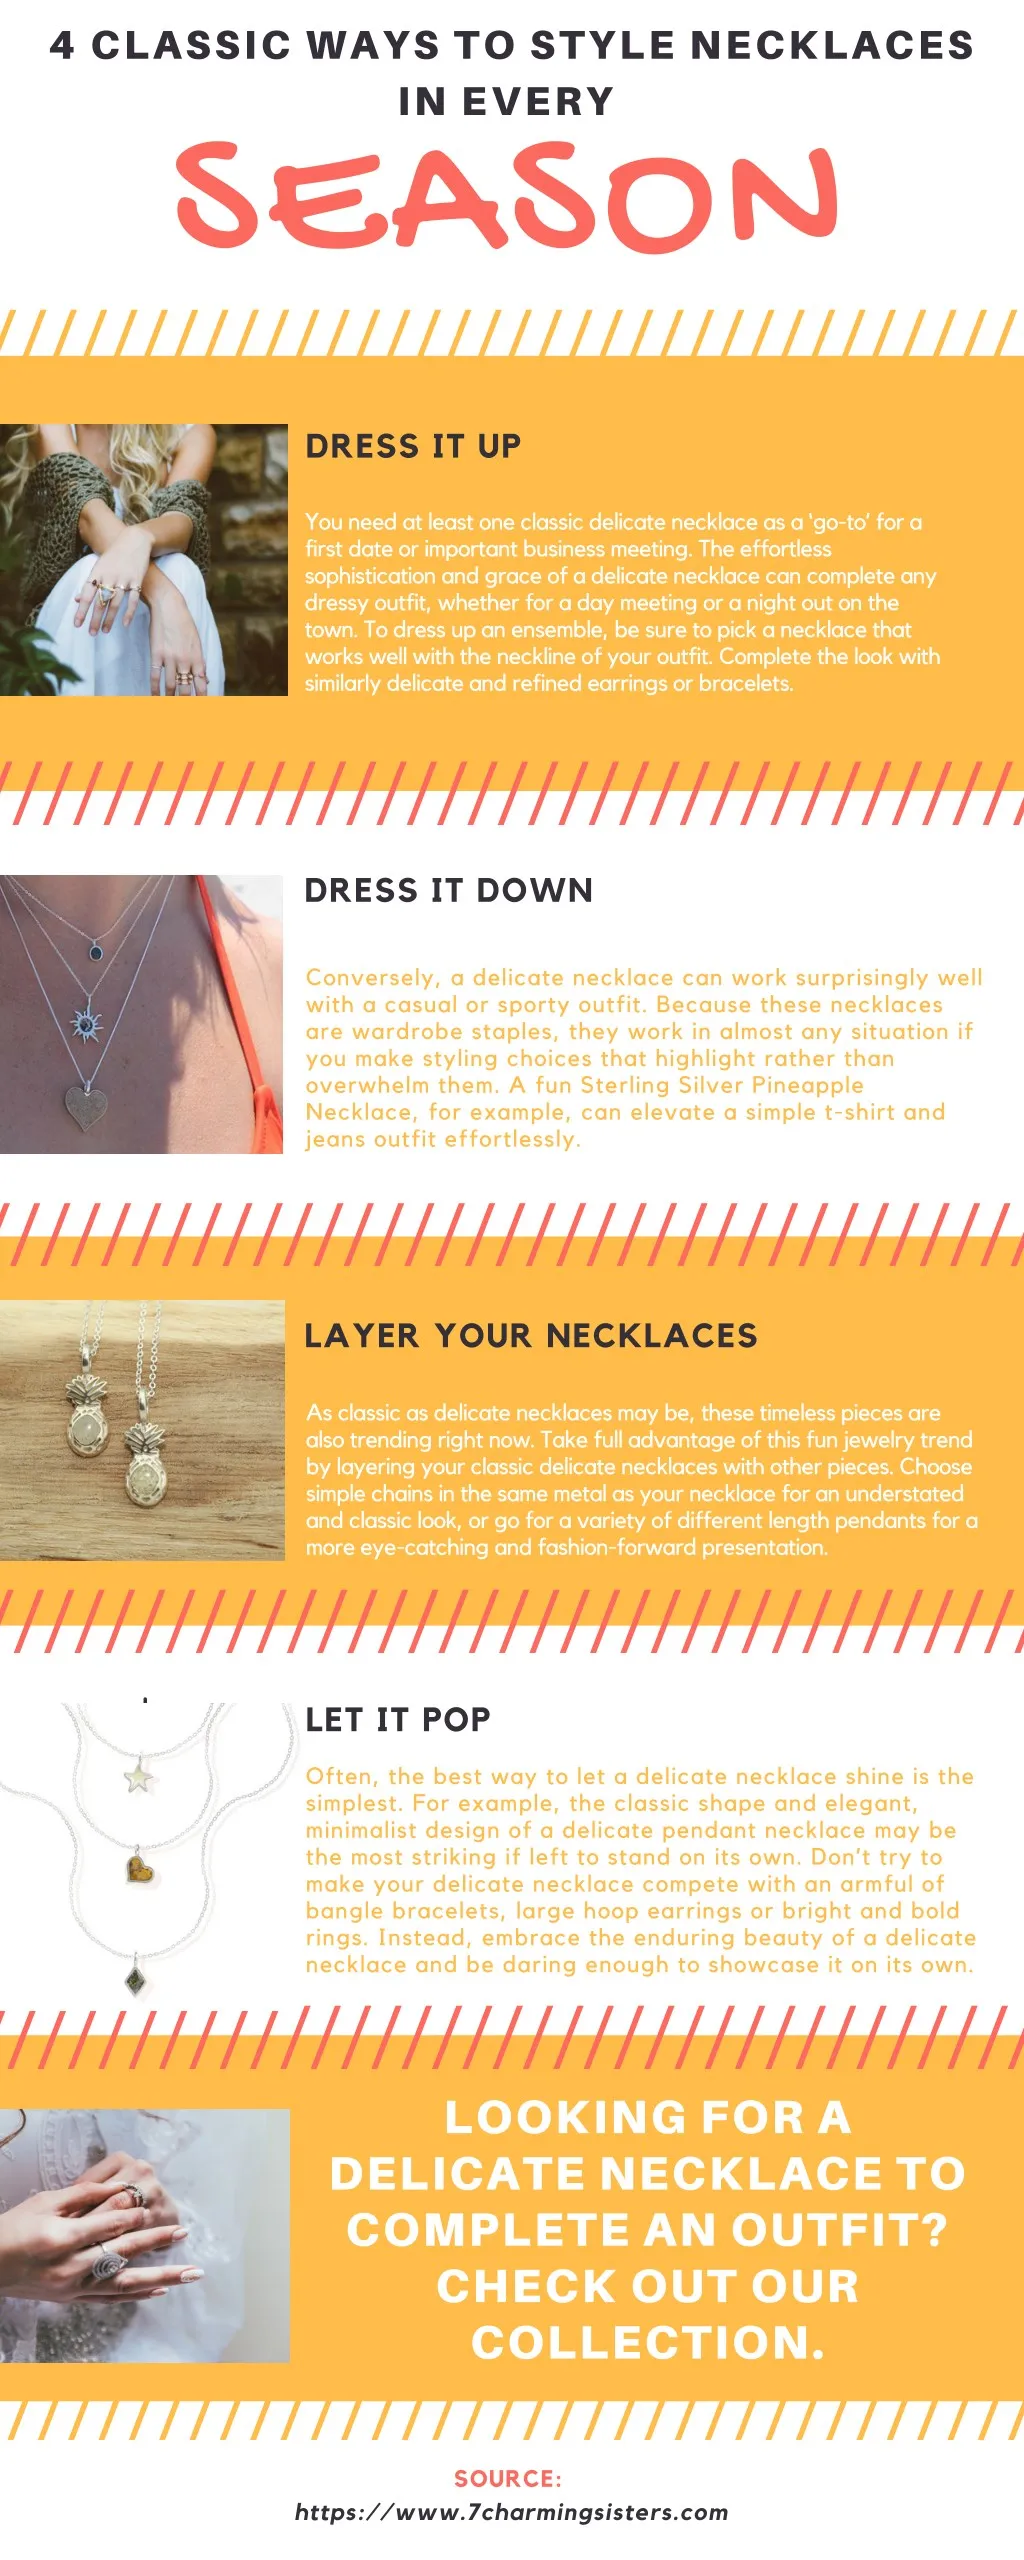 4 classic ways to style necklaces